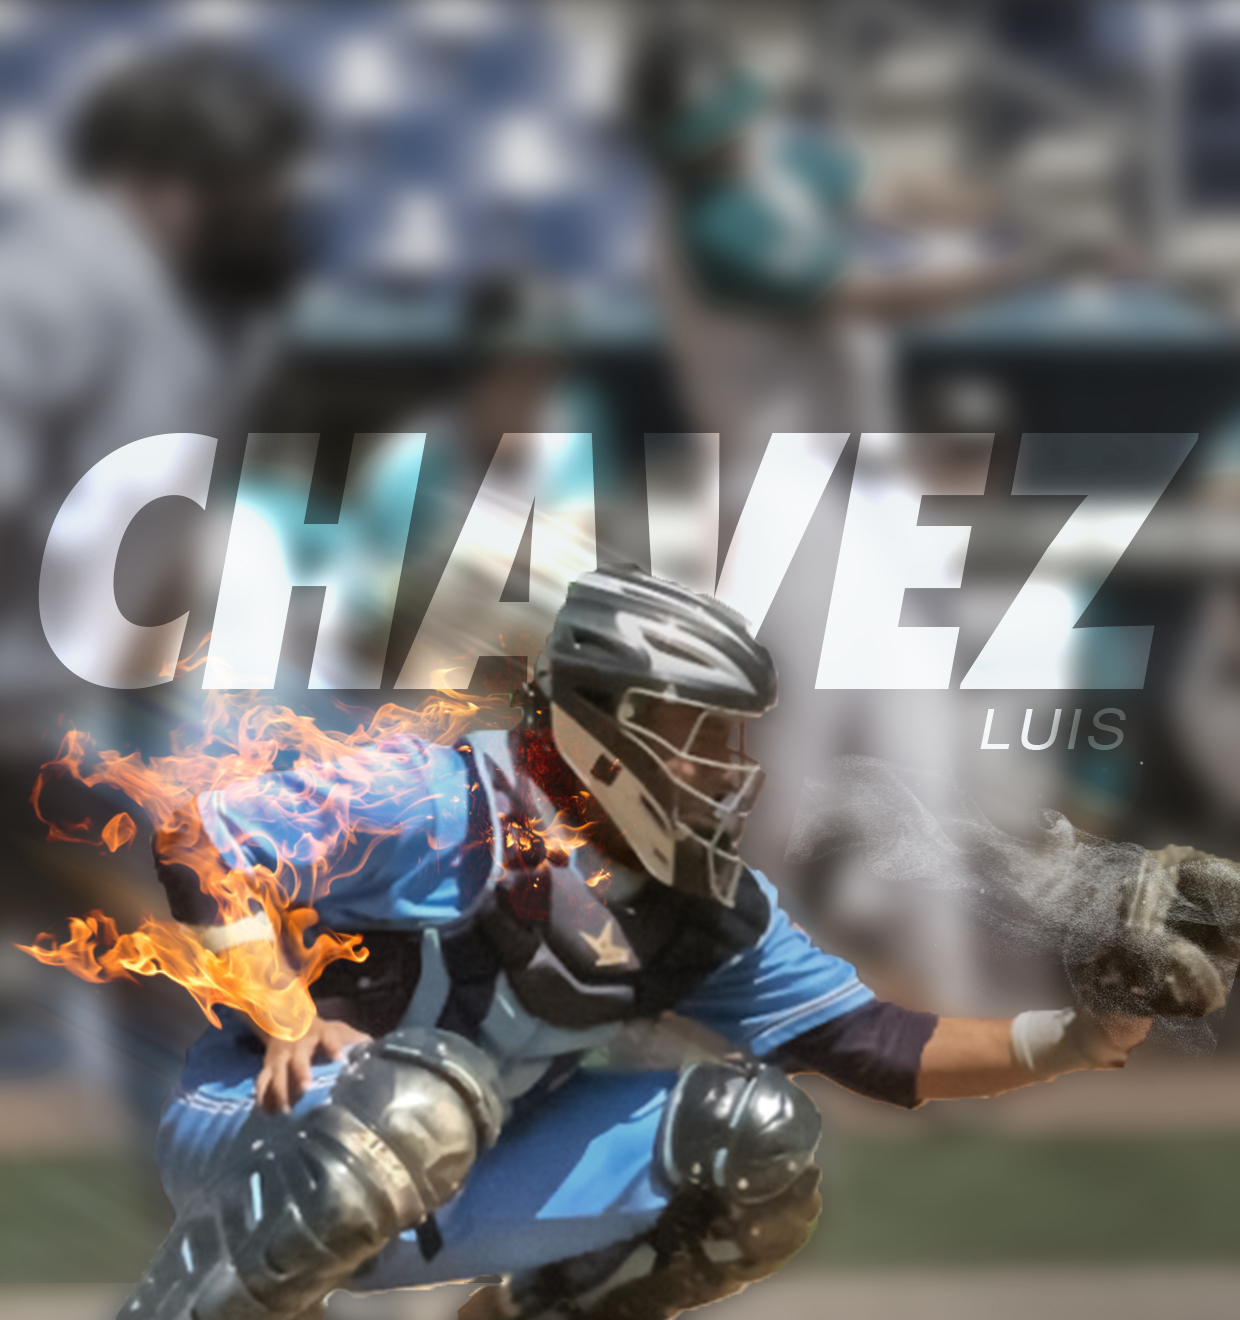 Read more about the article Chavez to Miami Dade